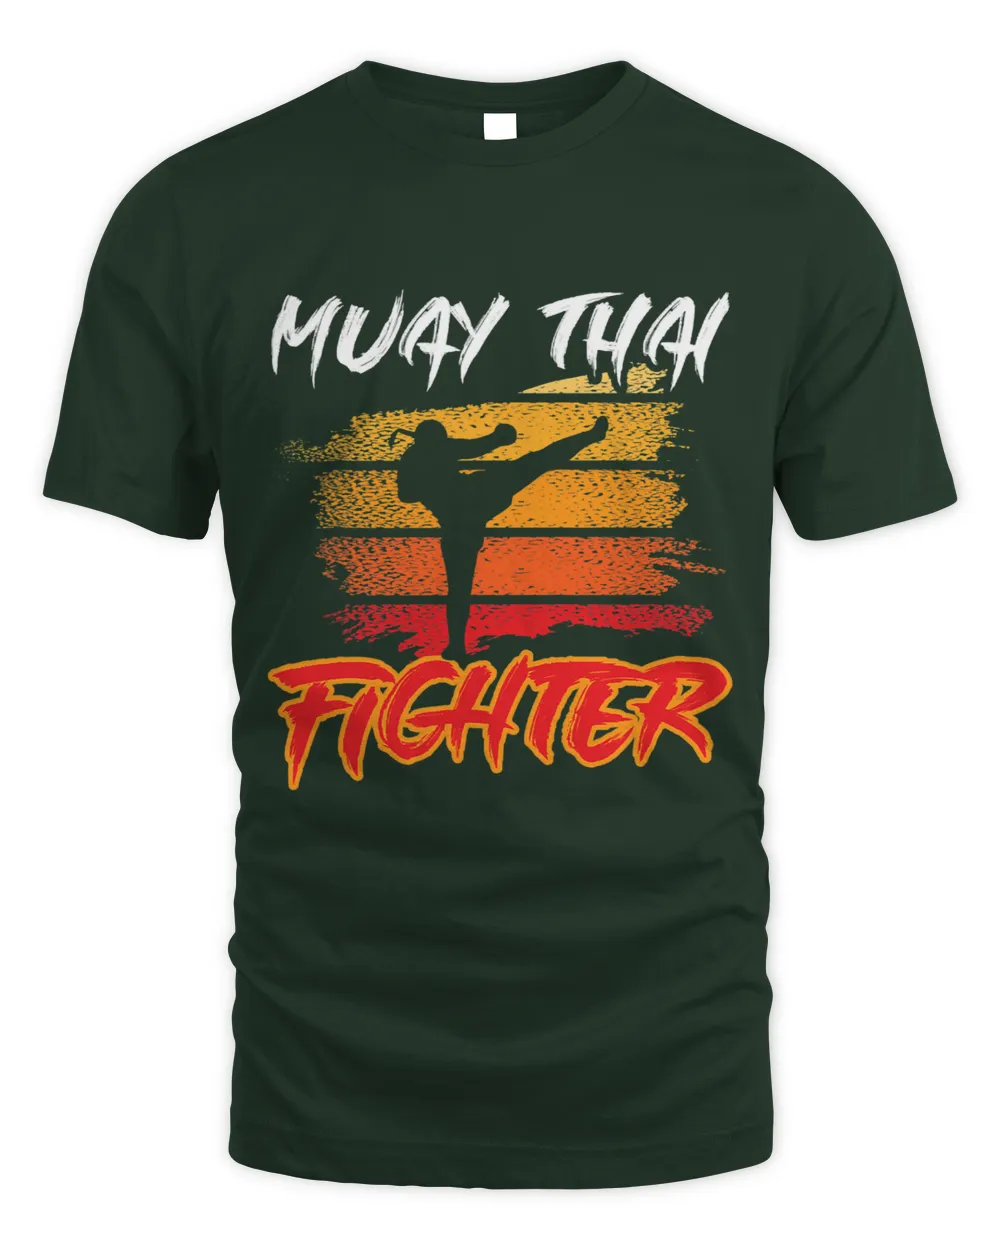 Muay Thai Fighter Martial Arts Boxing Hobby 28